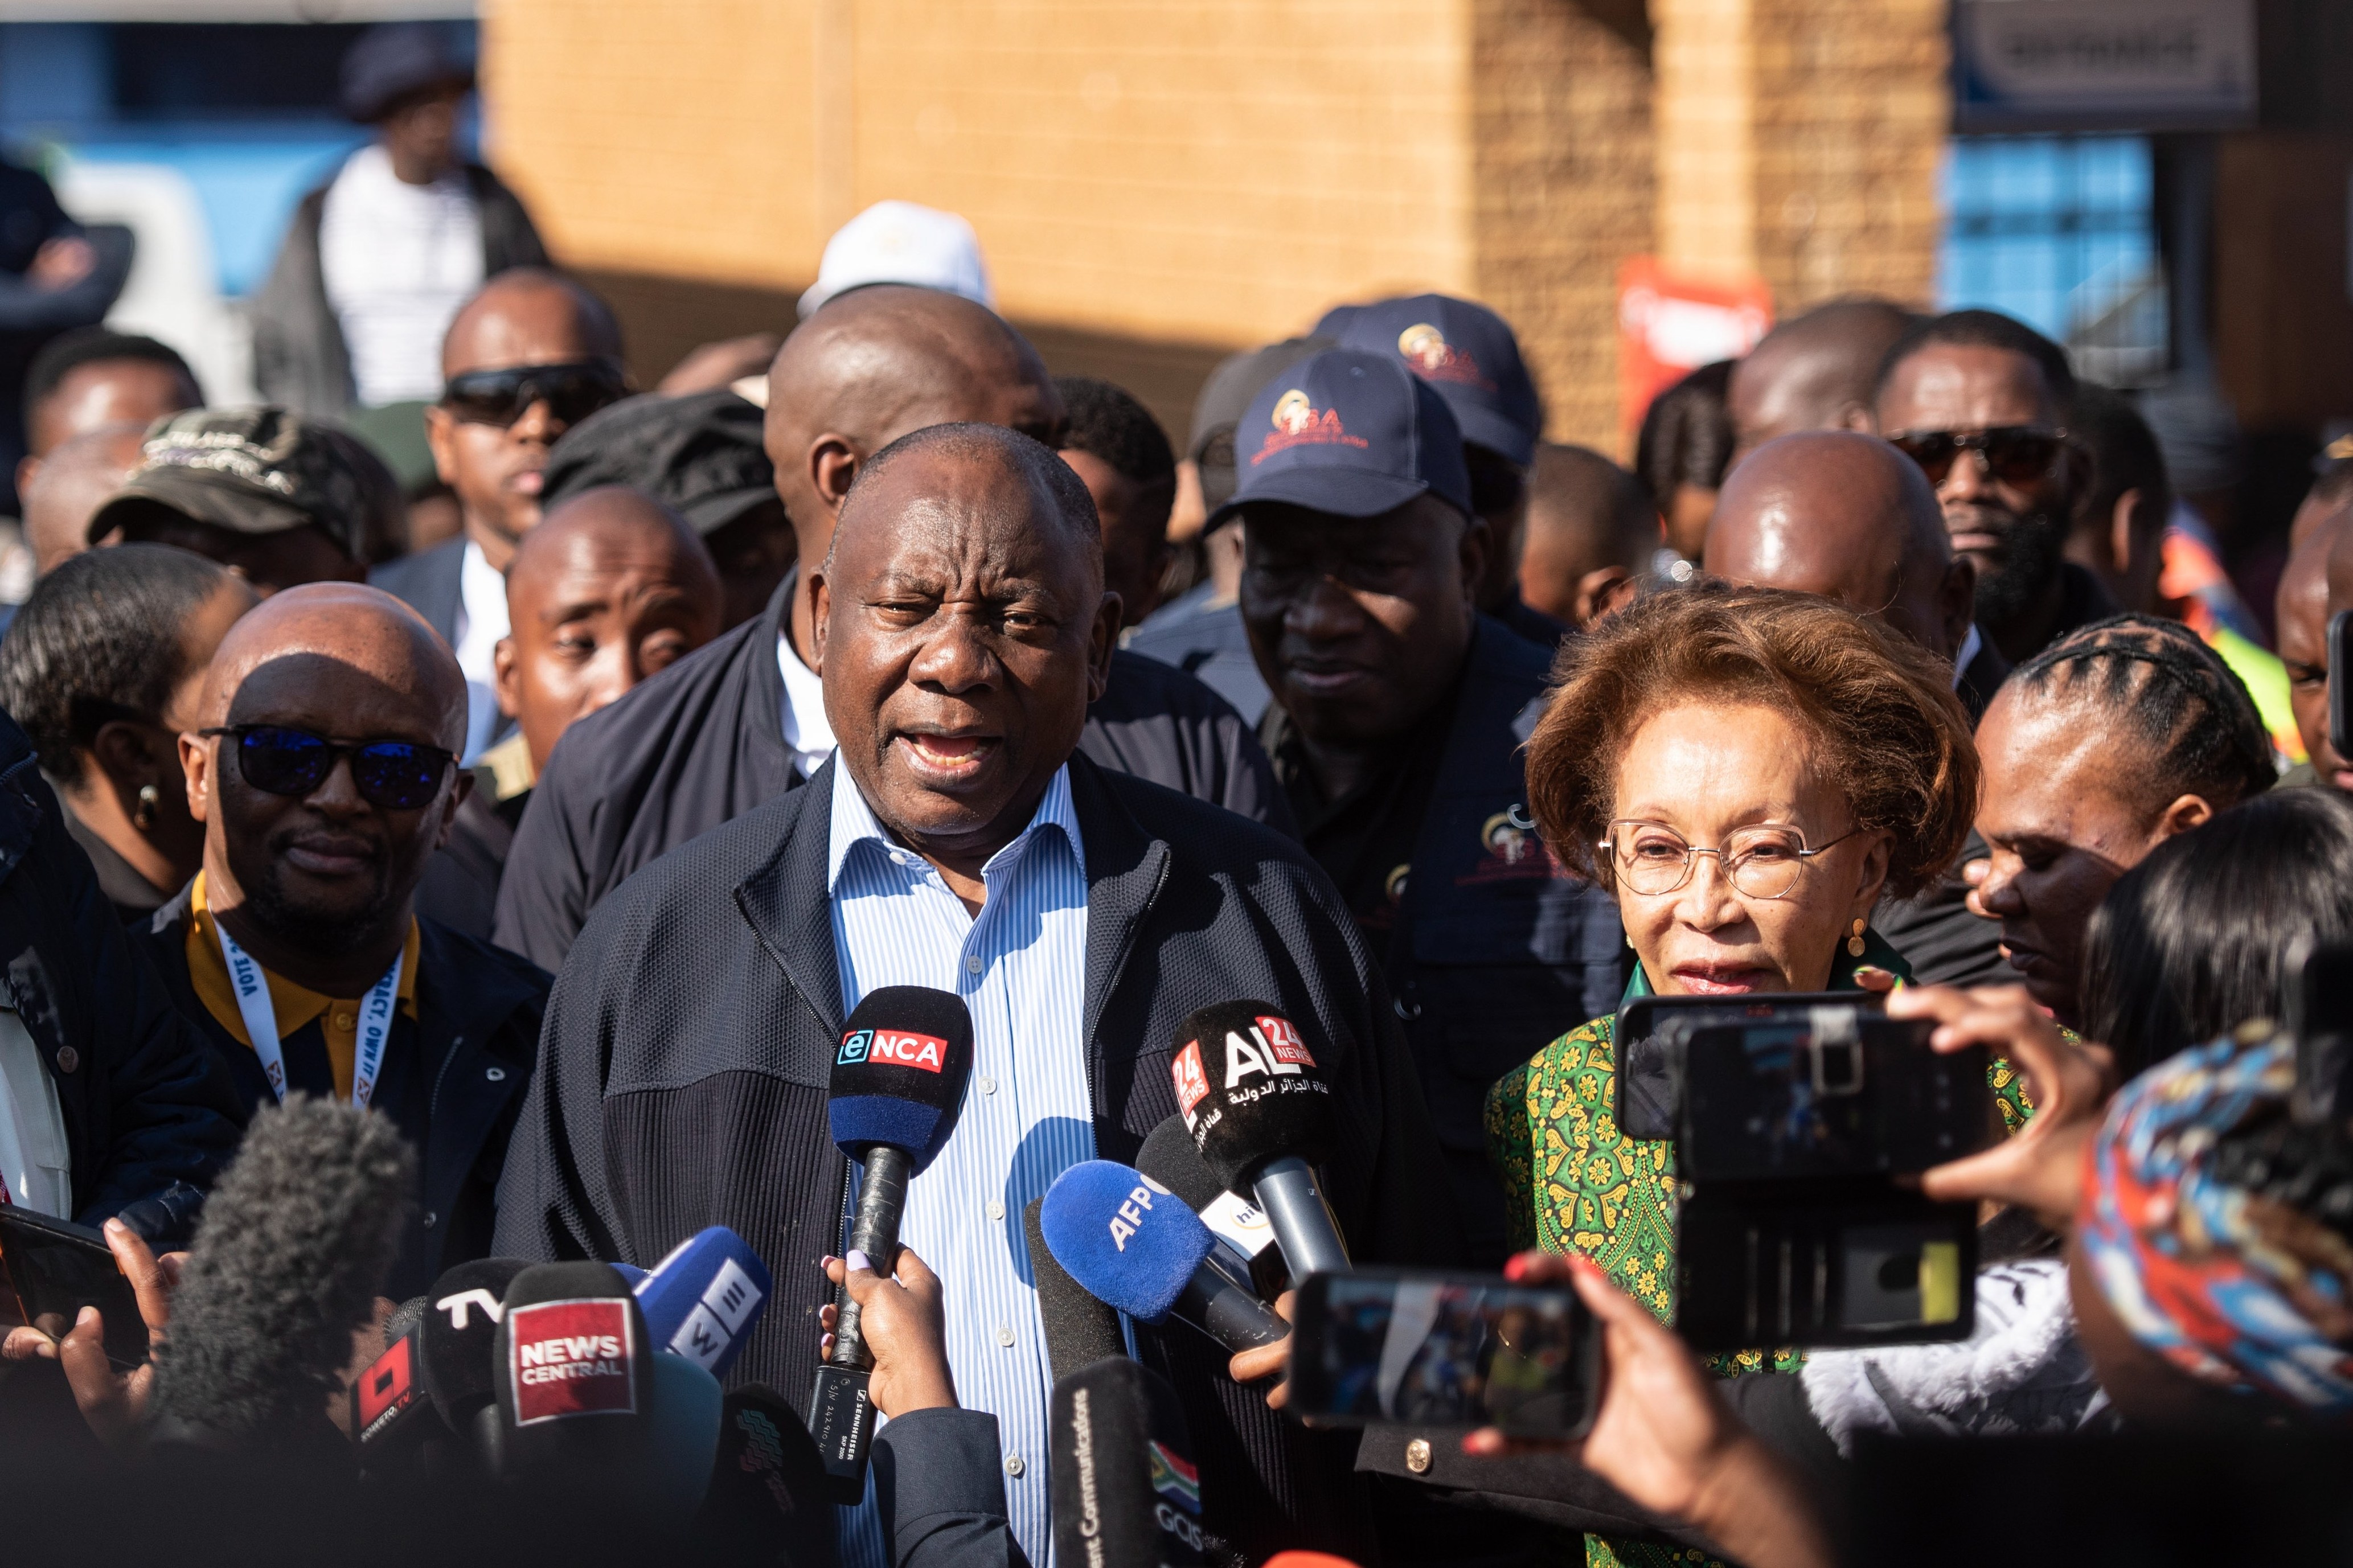 President Ramaphosa outside Hitekani Primary School in Soweto township after casting his ballot. Polls suggest his ANC party may stay above 45 per cent of the vote